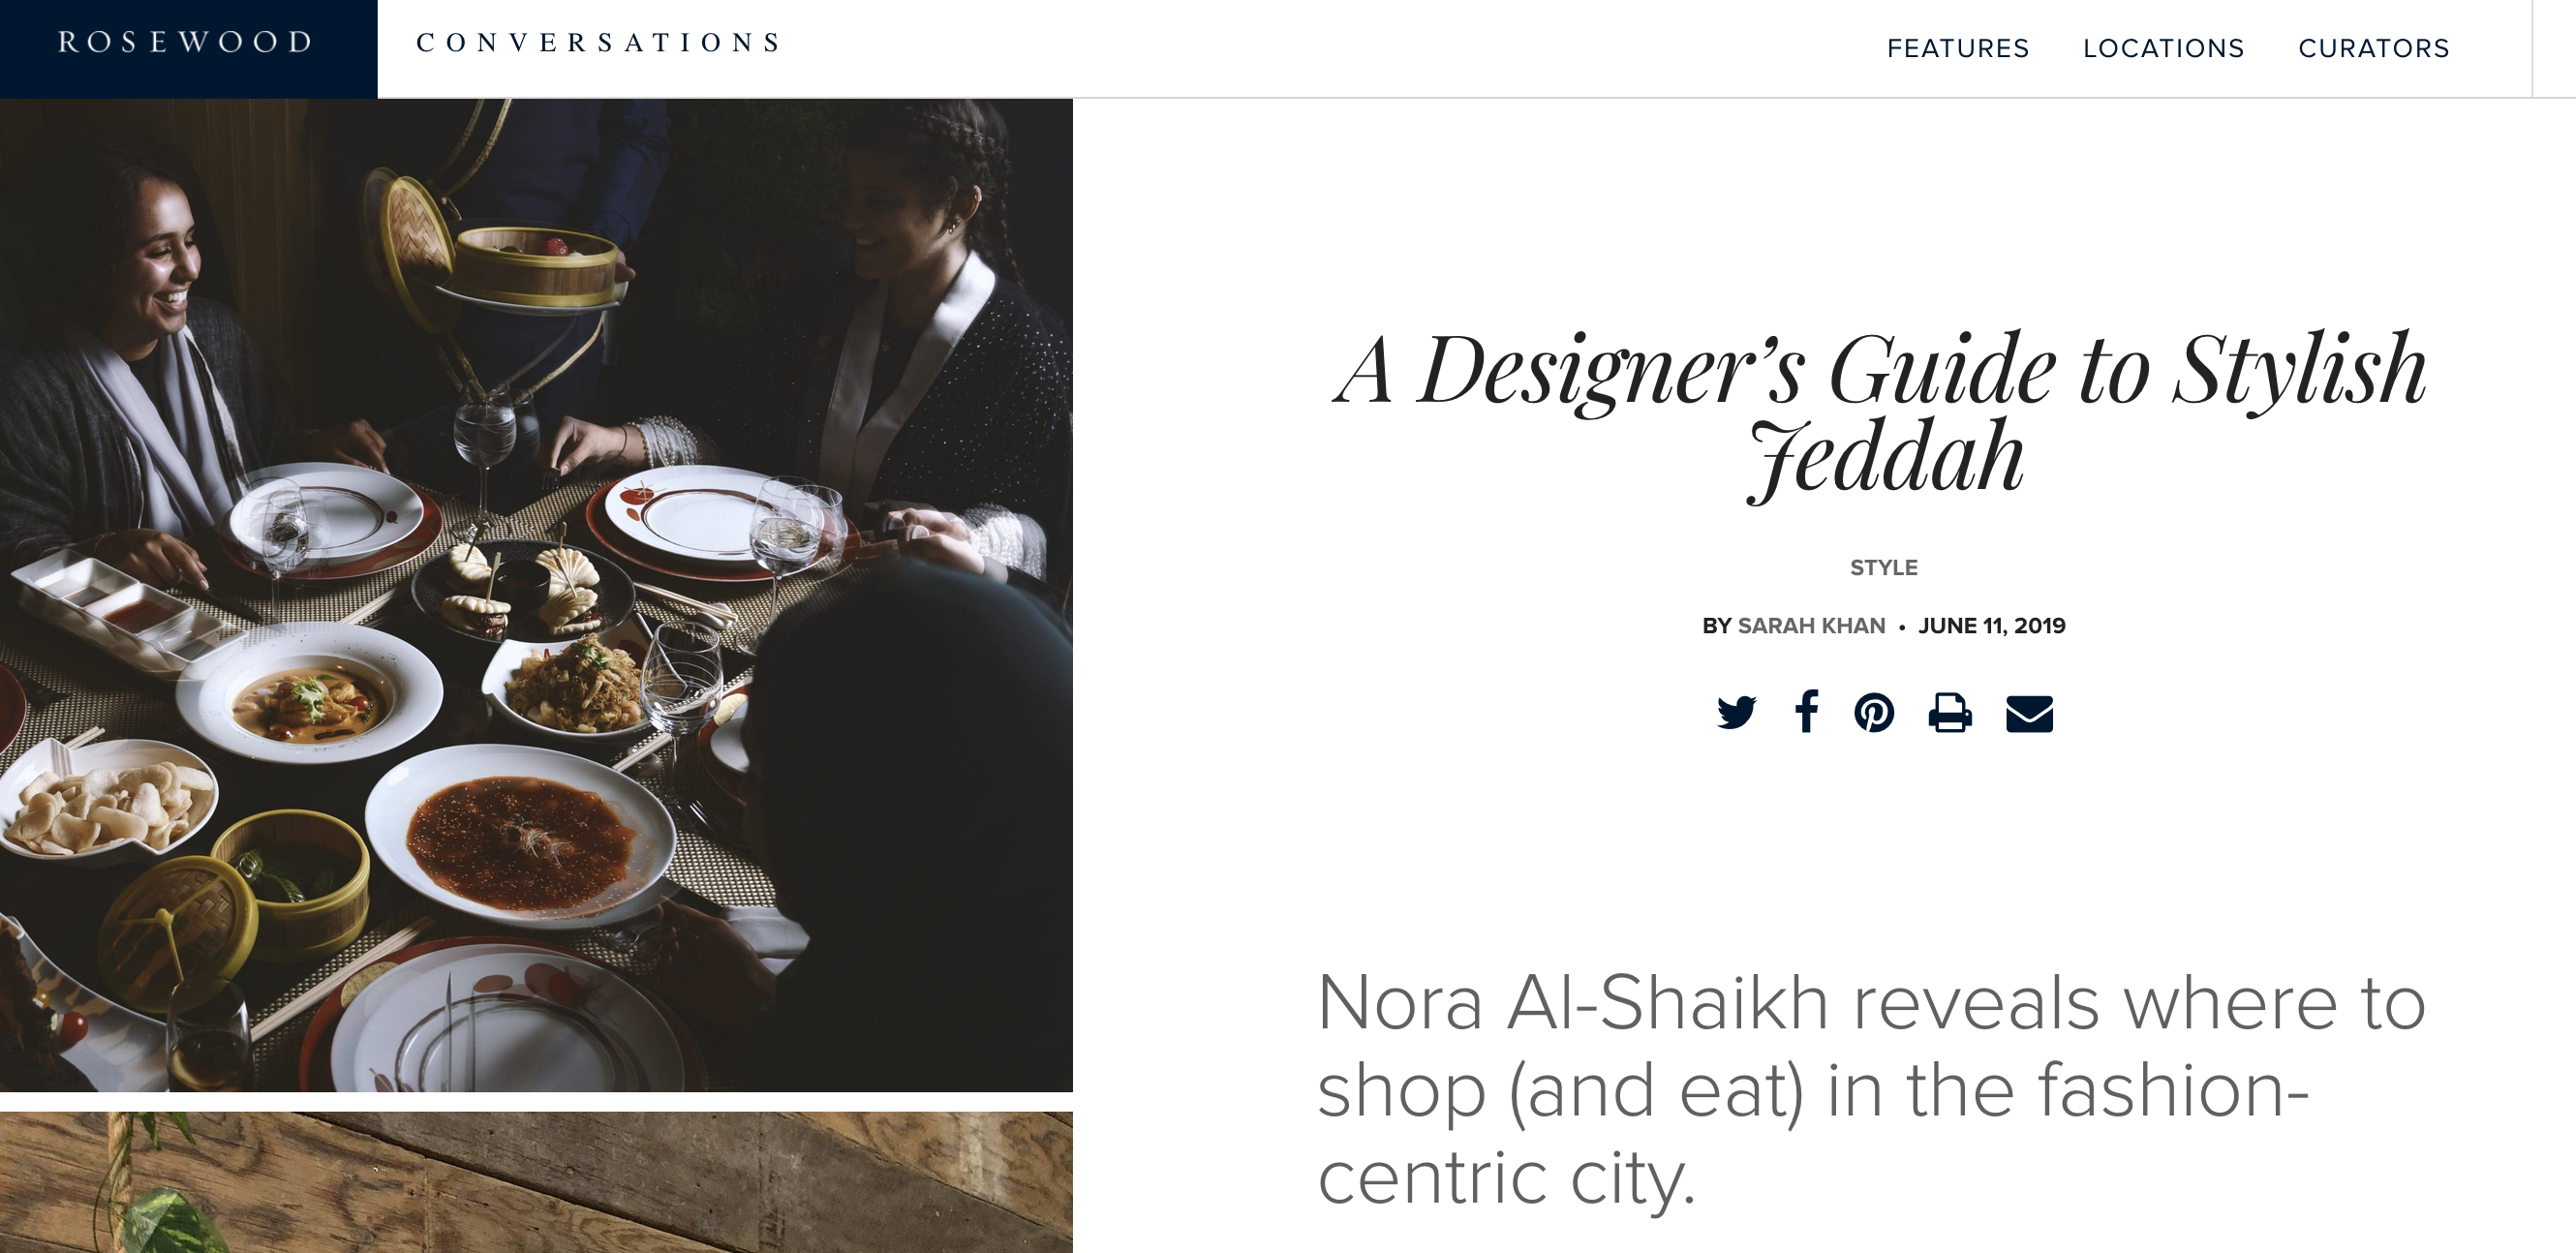 Rosewood Conversations: A Designer’s Guide to Stylish Jeddah